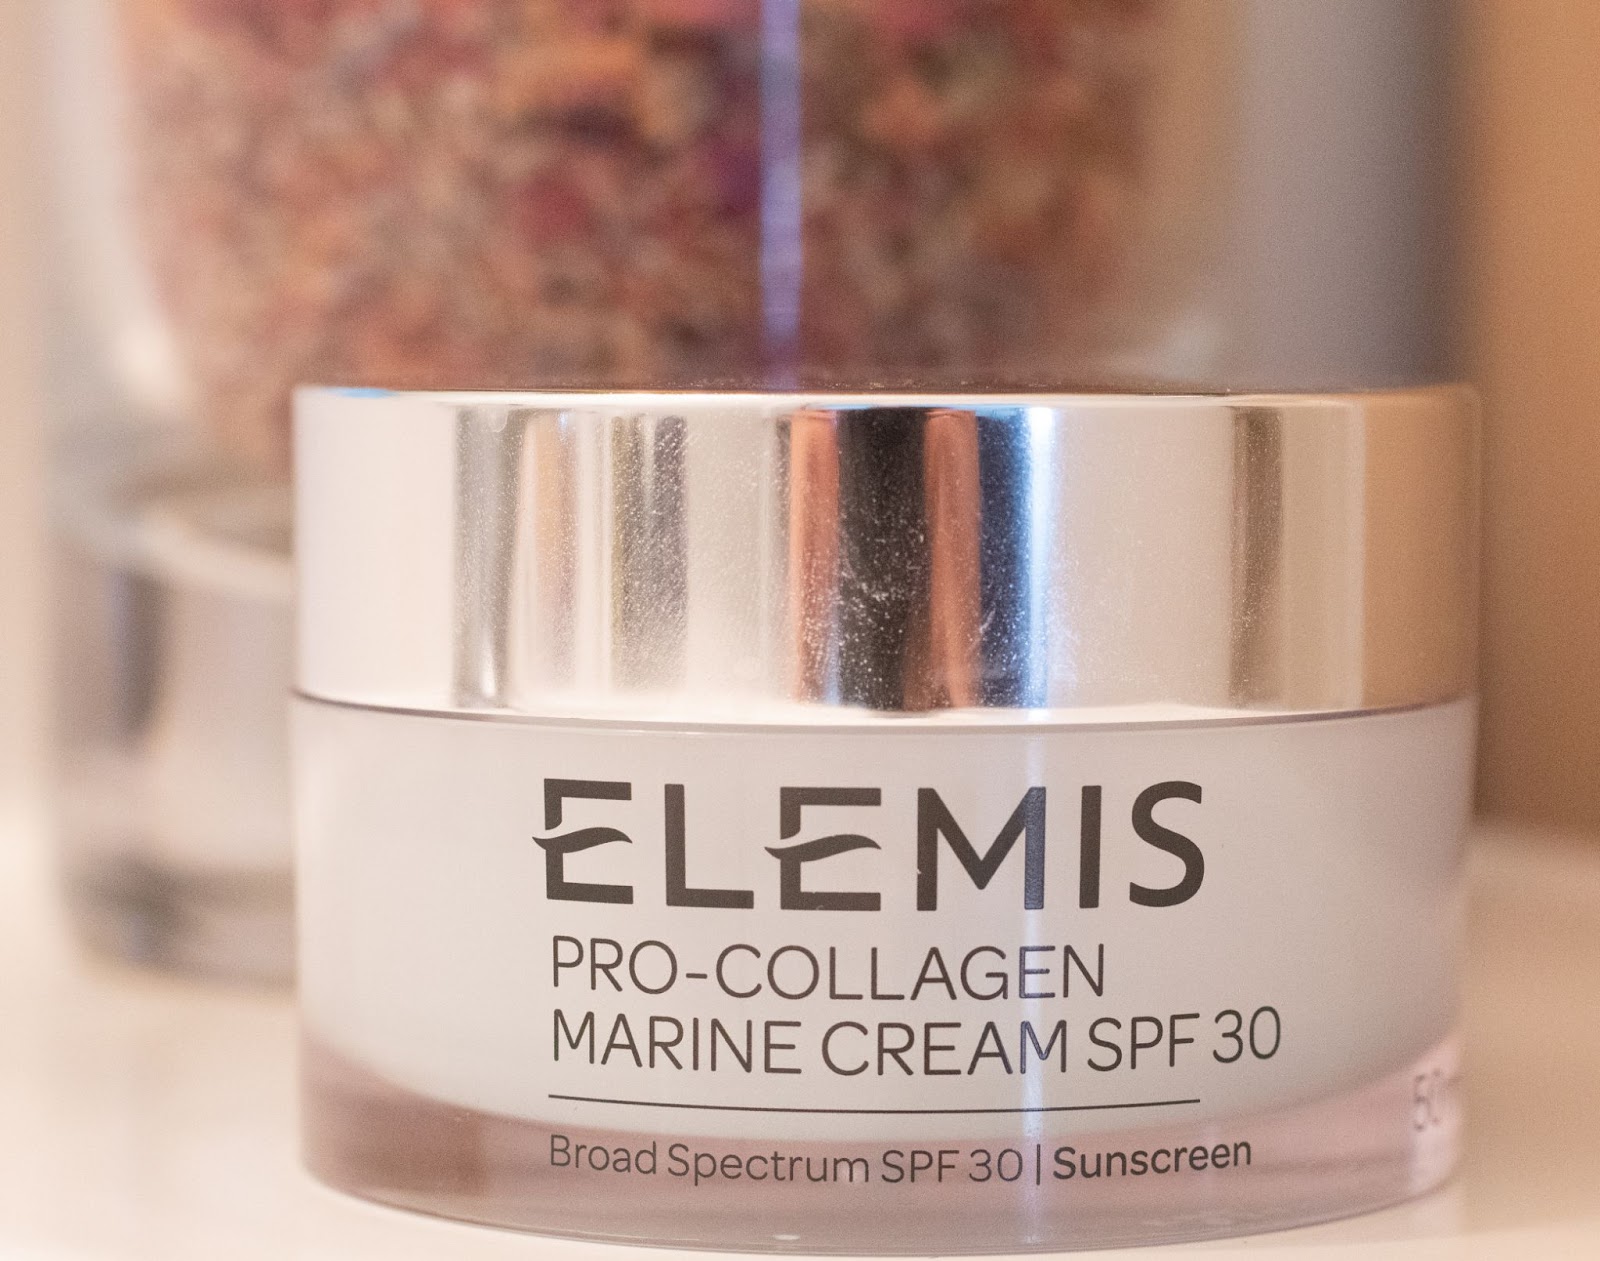 ELEMIS Skin Care Product Review - Pro-Collagen Marine Cream SPF30 - Patience & Pearls